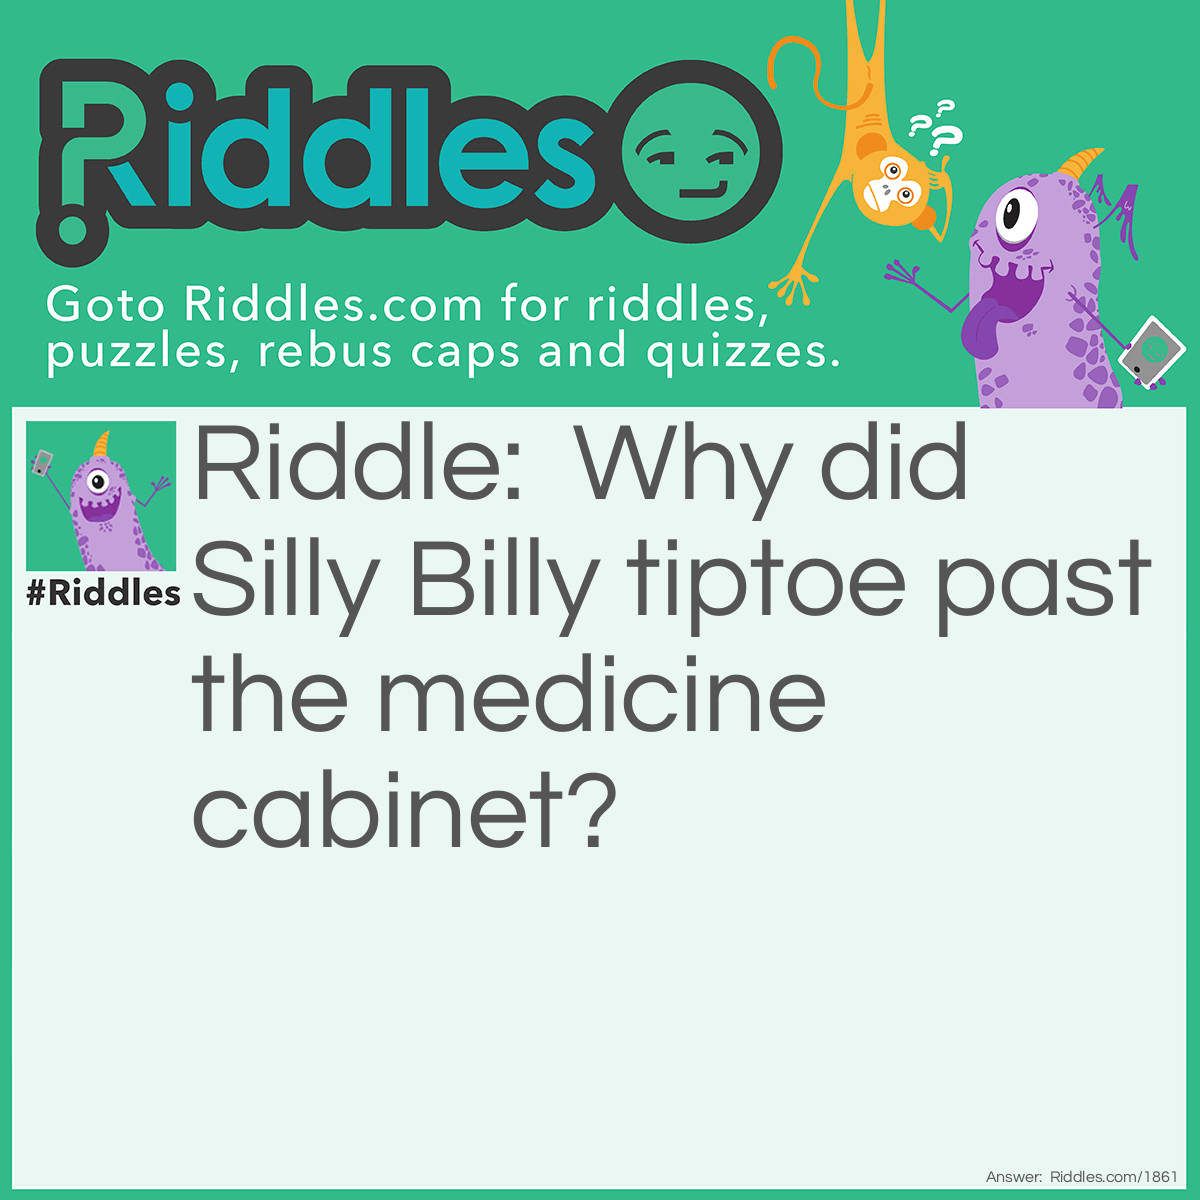 Riddle: Why did <a href="https://www.riddles.com/funny-riddles">Silly</a> Billy tiptoe past the medicine cabinet? Answer: He didn't want to wake up the sleeping pills.